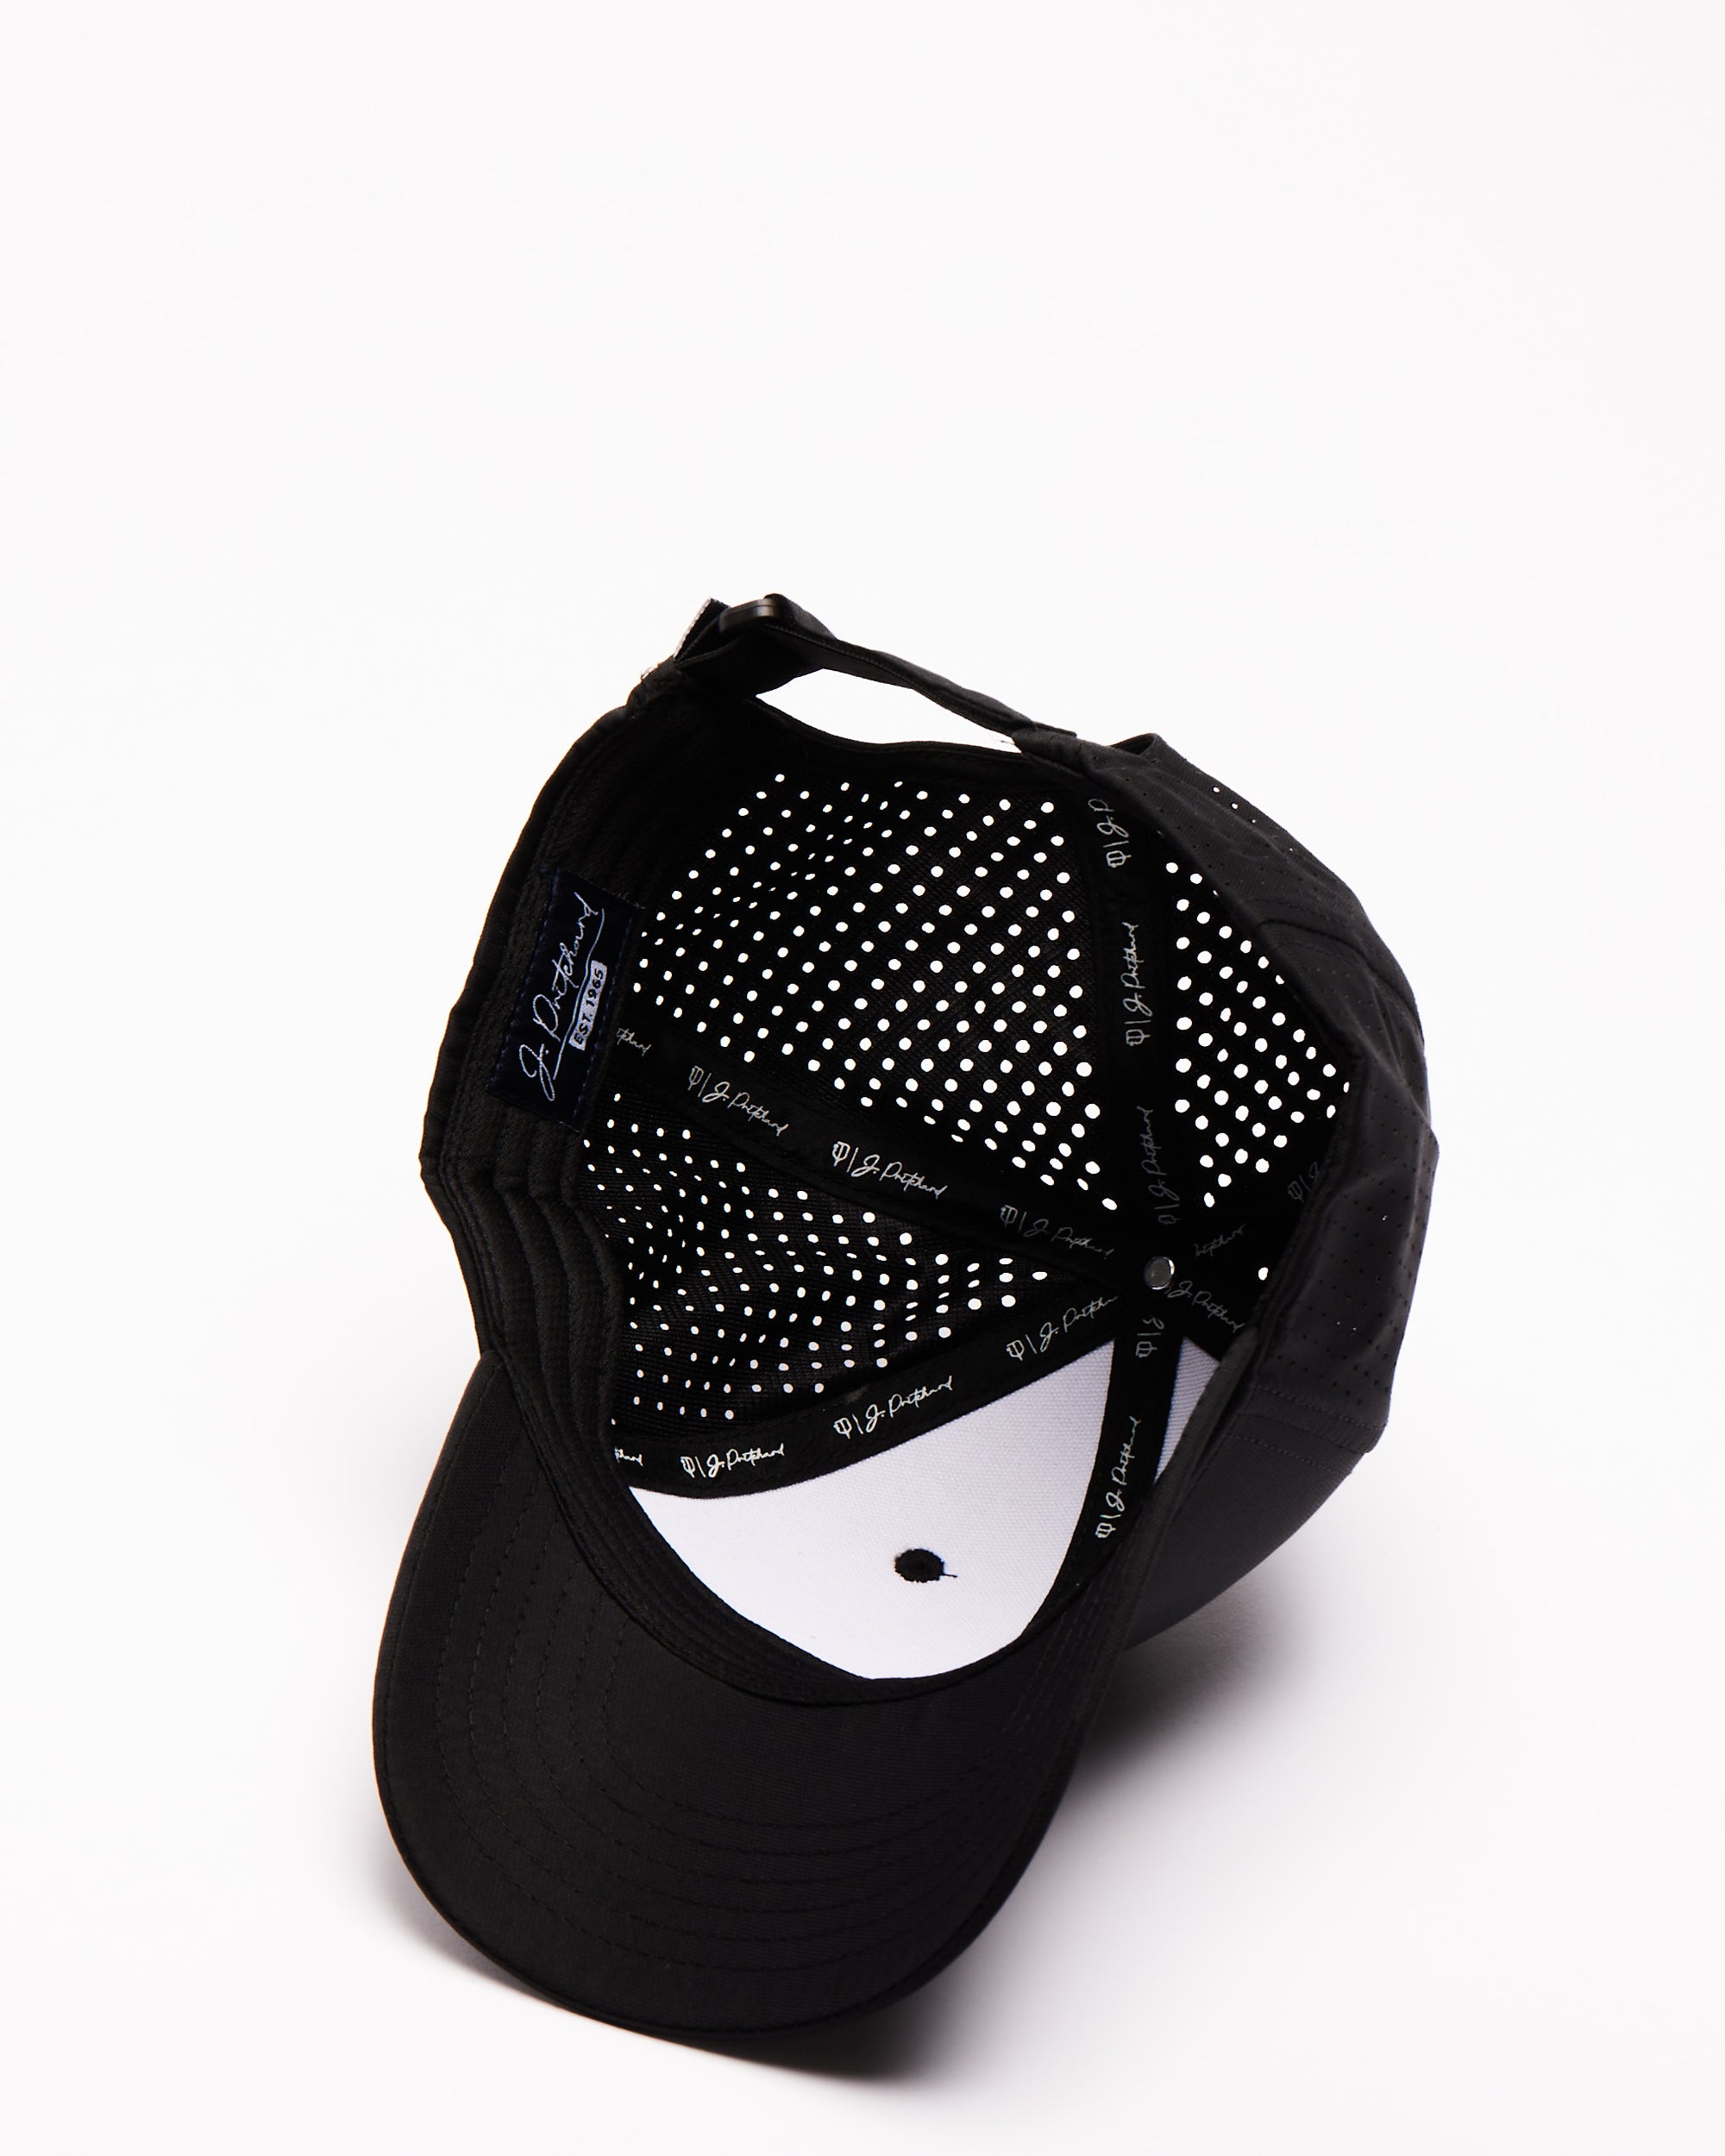 PERFORMANCE HAT - THE COURTSIDE